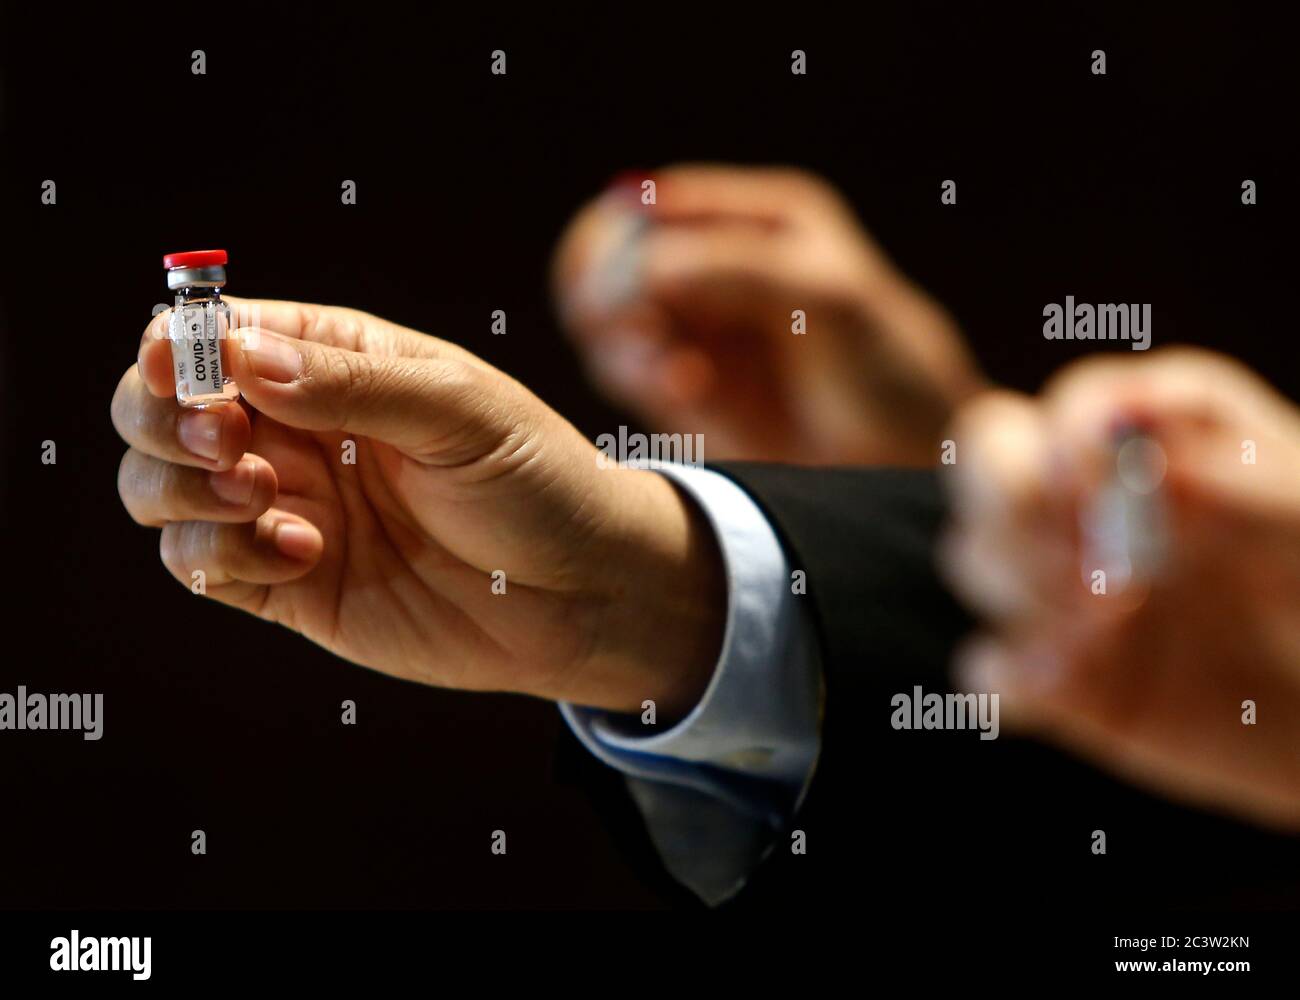 Saraburi, Thailand. 22nd June, 2020. Researchers hold a COVID-19 mRNA vaccine during a news conference at the National Primate Research Center of Chulalongkorn University.Some vaccine candidates are in early stage of development, but 2 candidate vaccines are already in animal evaluation. The mRNA vaccine developed by Chulalongkorn University has proceeded through evaluation in mouse and then in Monkey. Second dose in Monkey is given on June 22, 2020. Credit: SOPA Images Limited/Alamy Live News Stock Photo